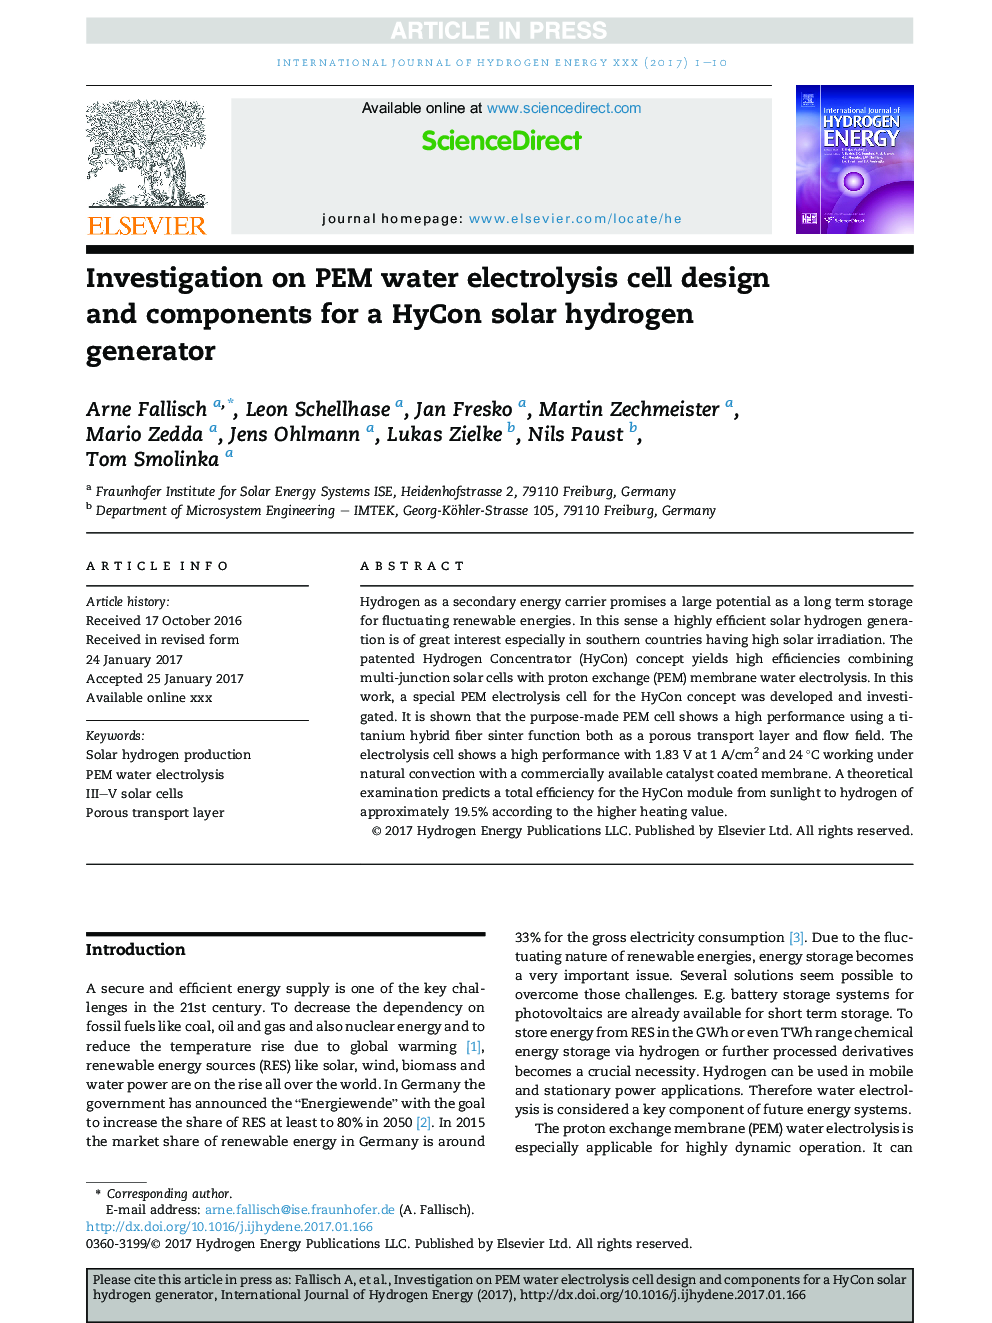 Investigation on PEM water electrolysis cell design and components for a HyCon solar hydrogen generator